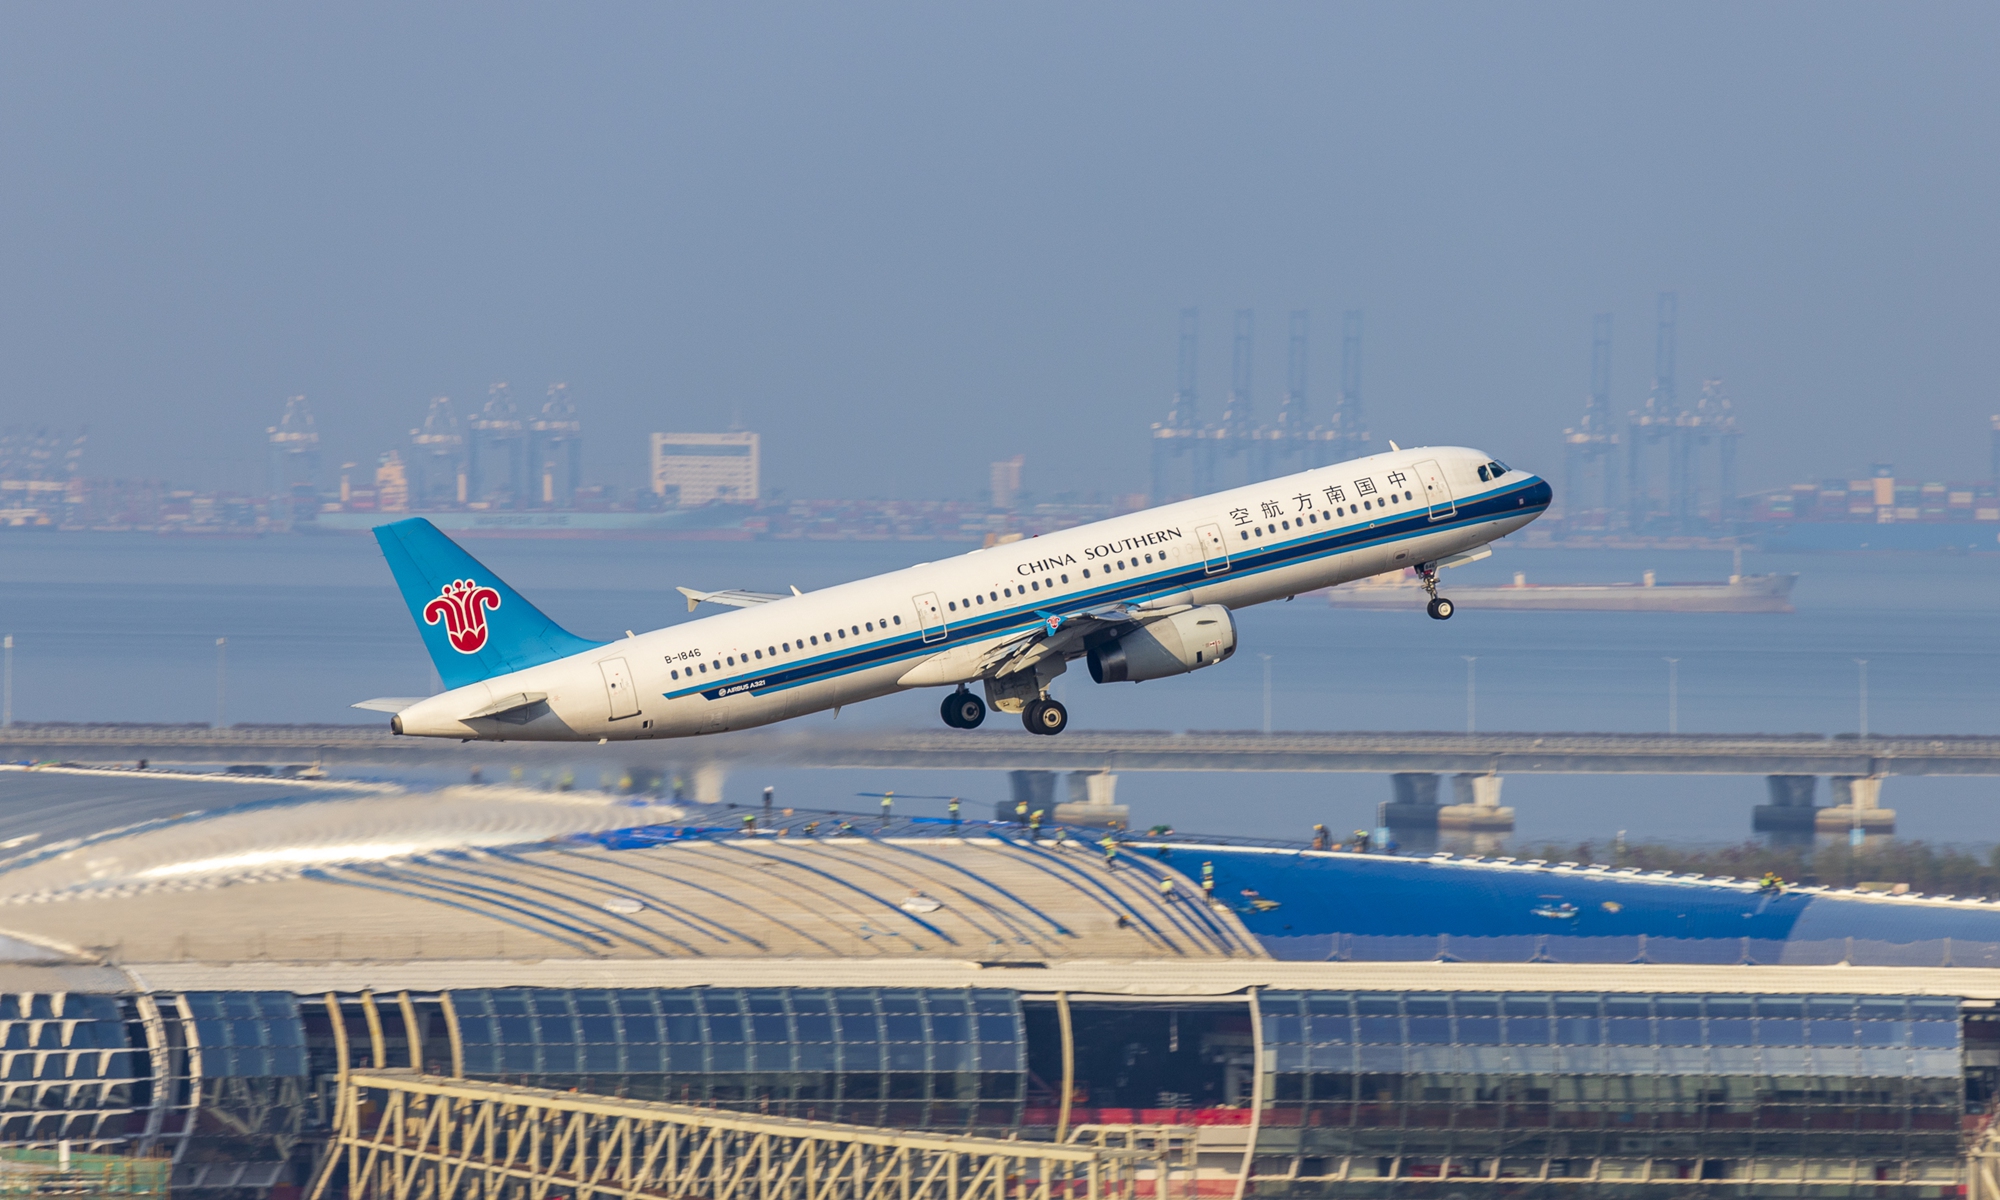 A Southern Airlines aircraft takes off from Shenzhen Baoan International Airport on February 13. Photo: VCG